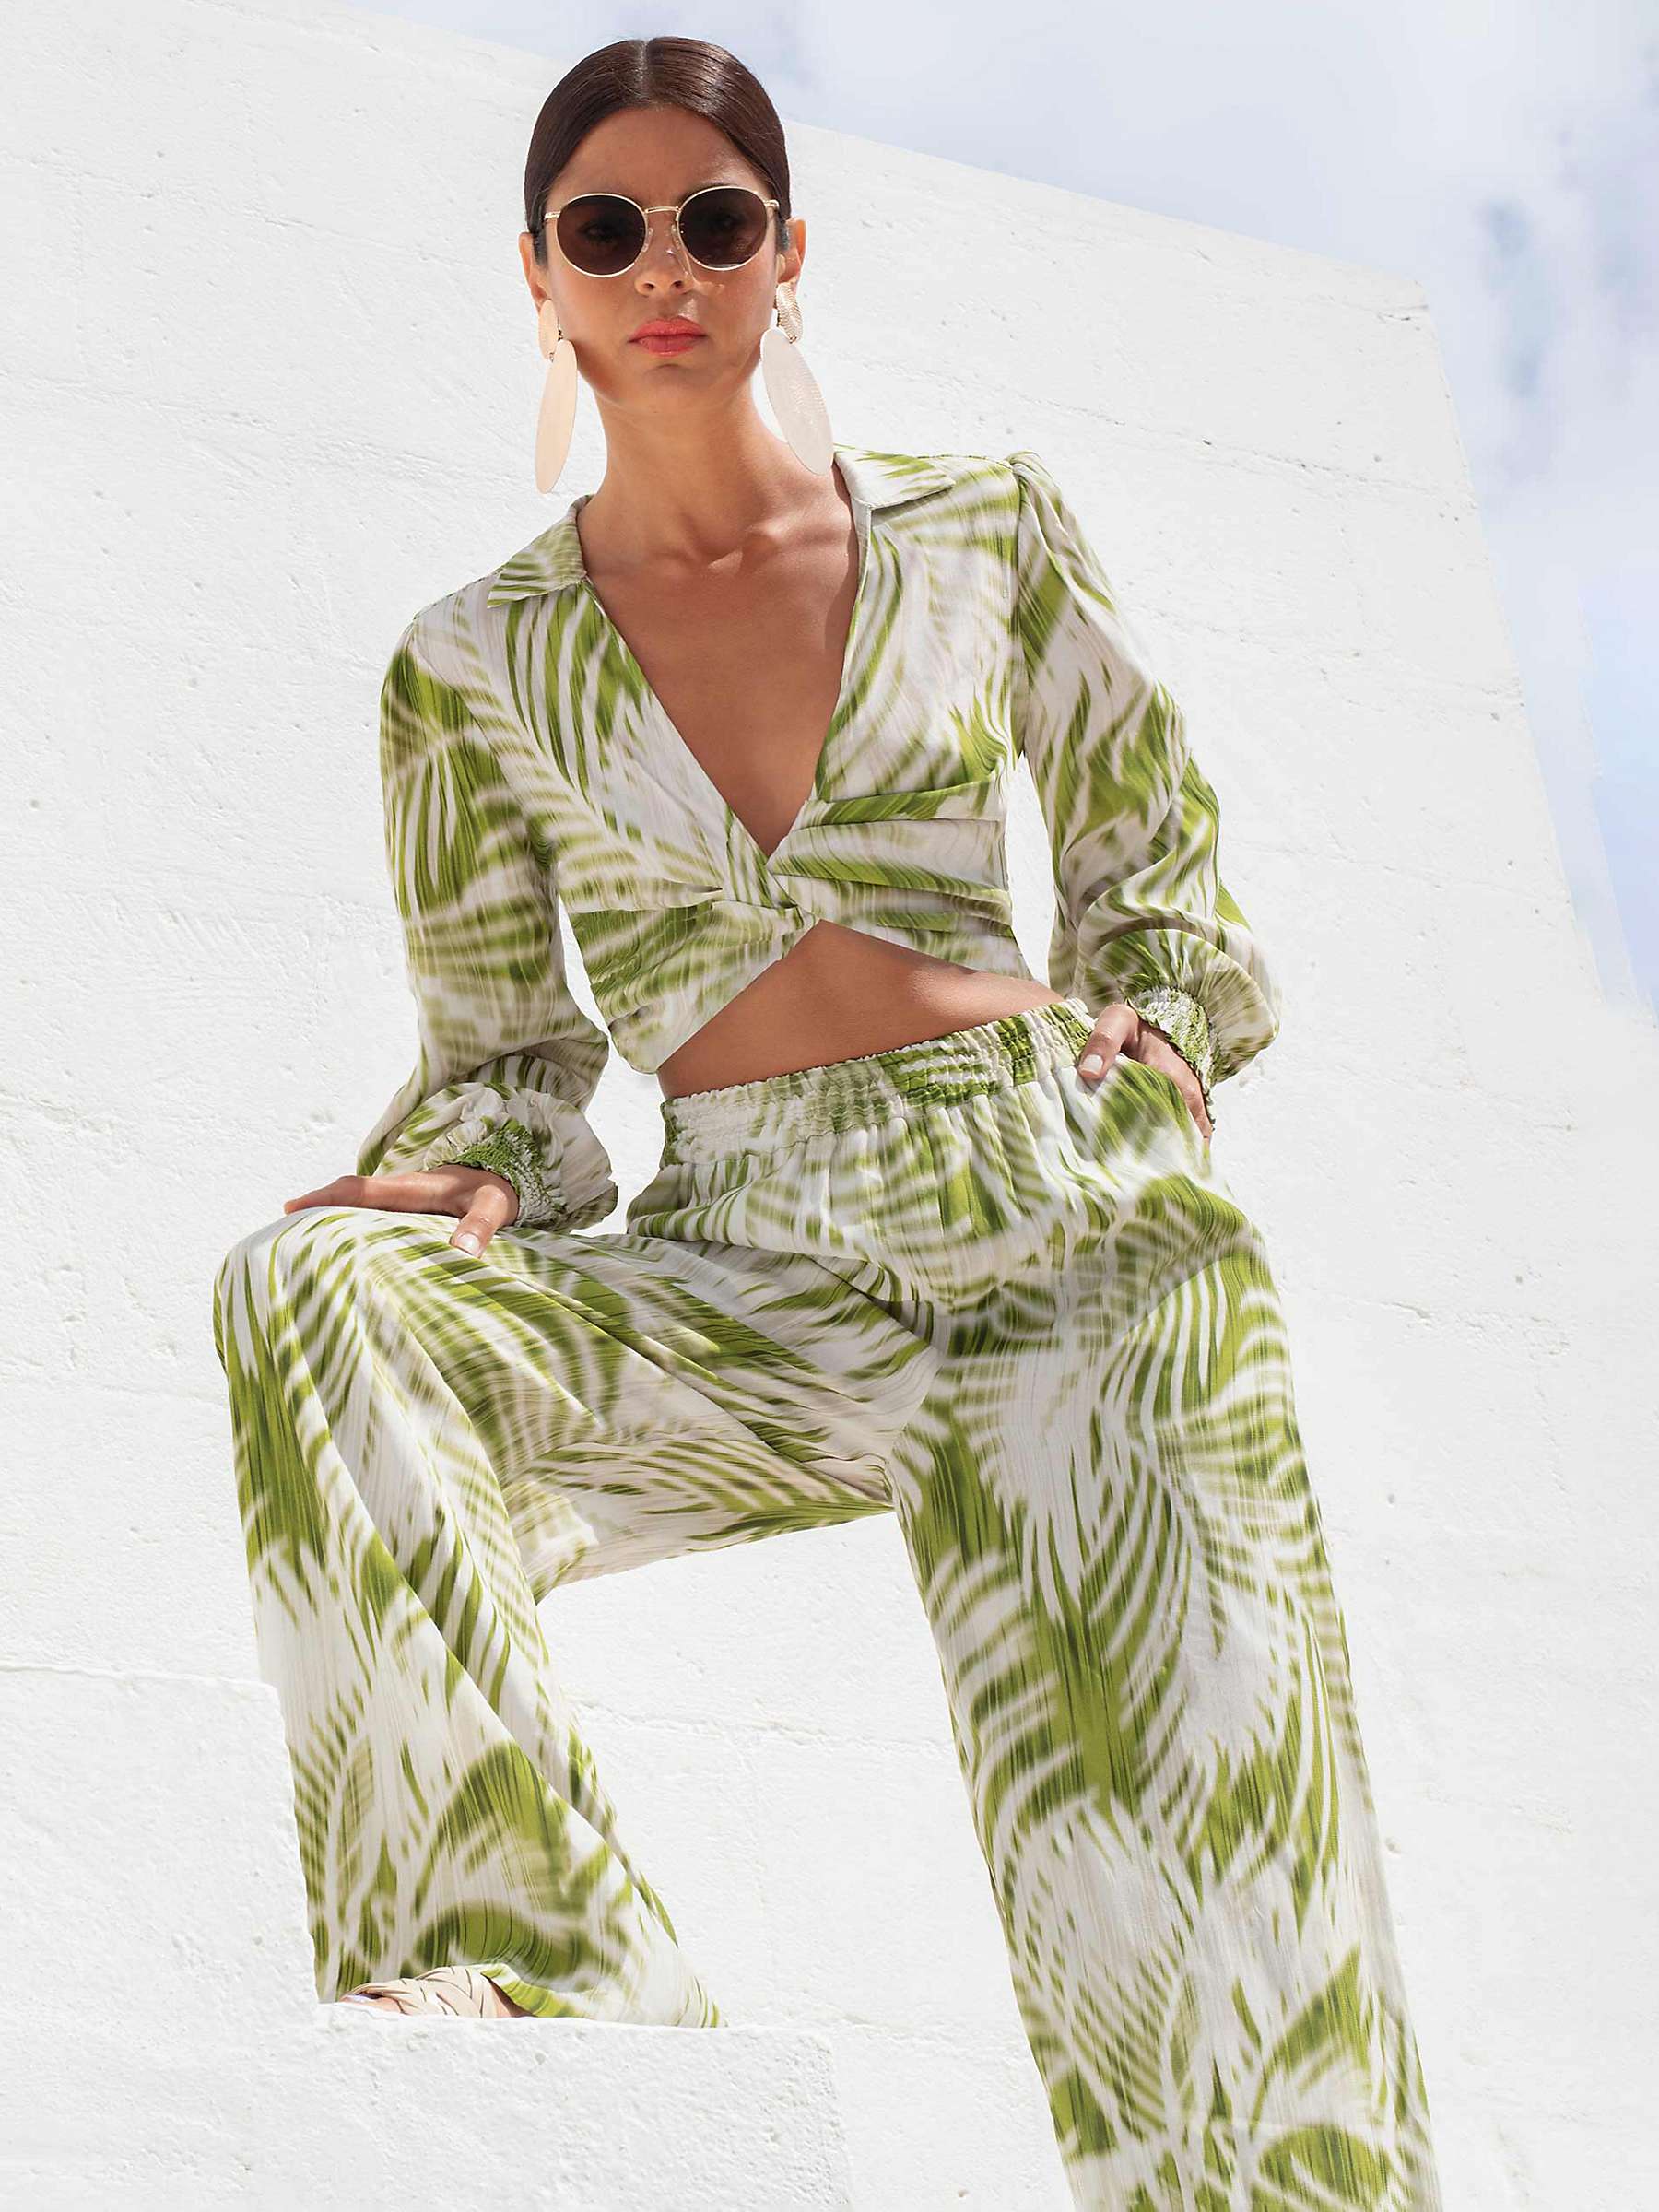 Buy Ro&Zo Palm Print Twist Front Top, Green Online at johnlewis.com